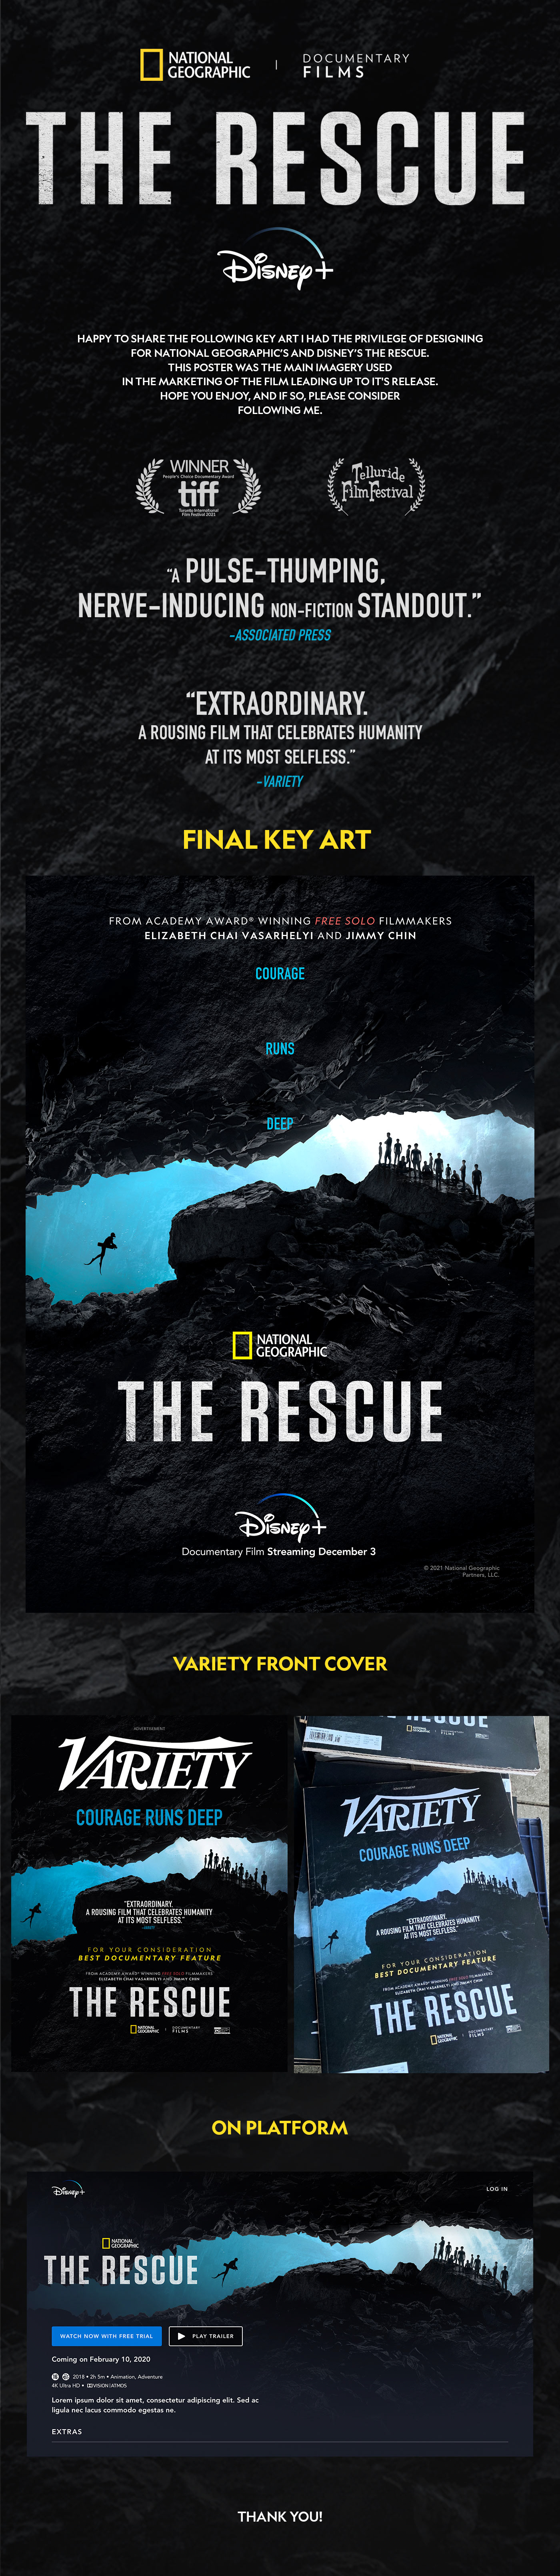 key art poster NATGEO Nation Geographic the rescue national geographic film poster indie movie one sheet